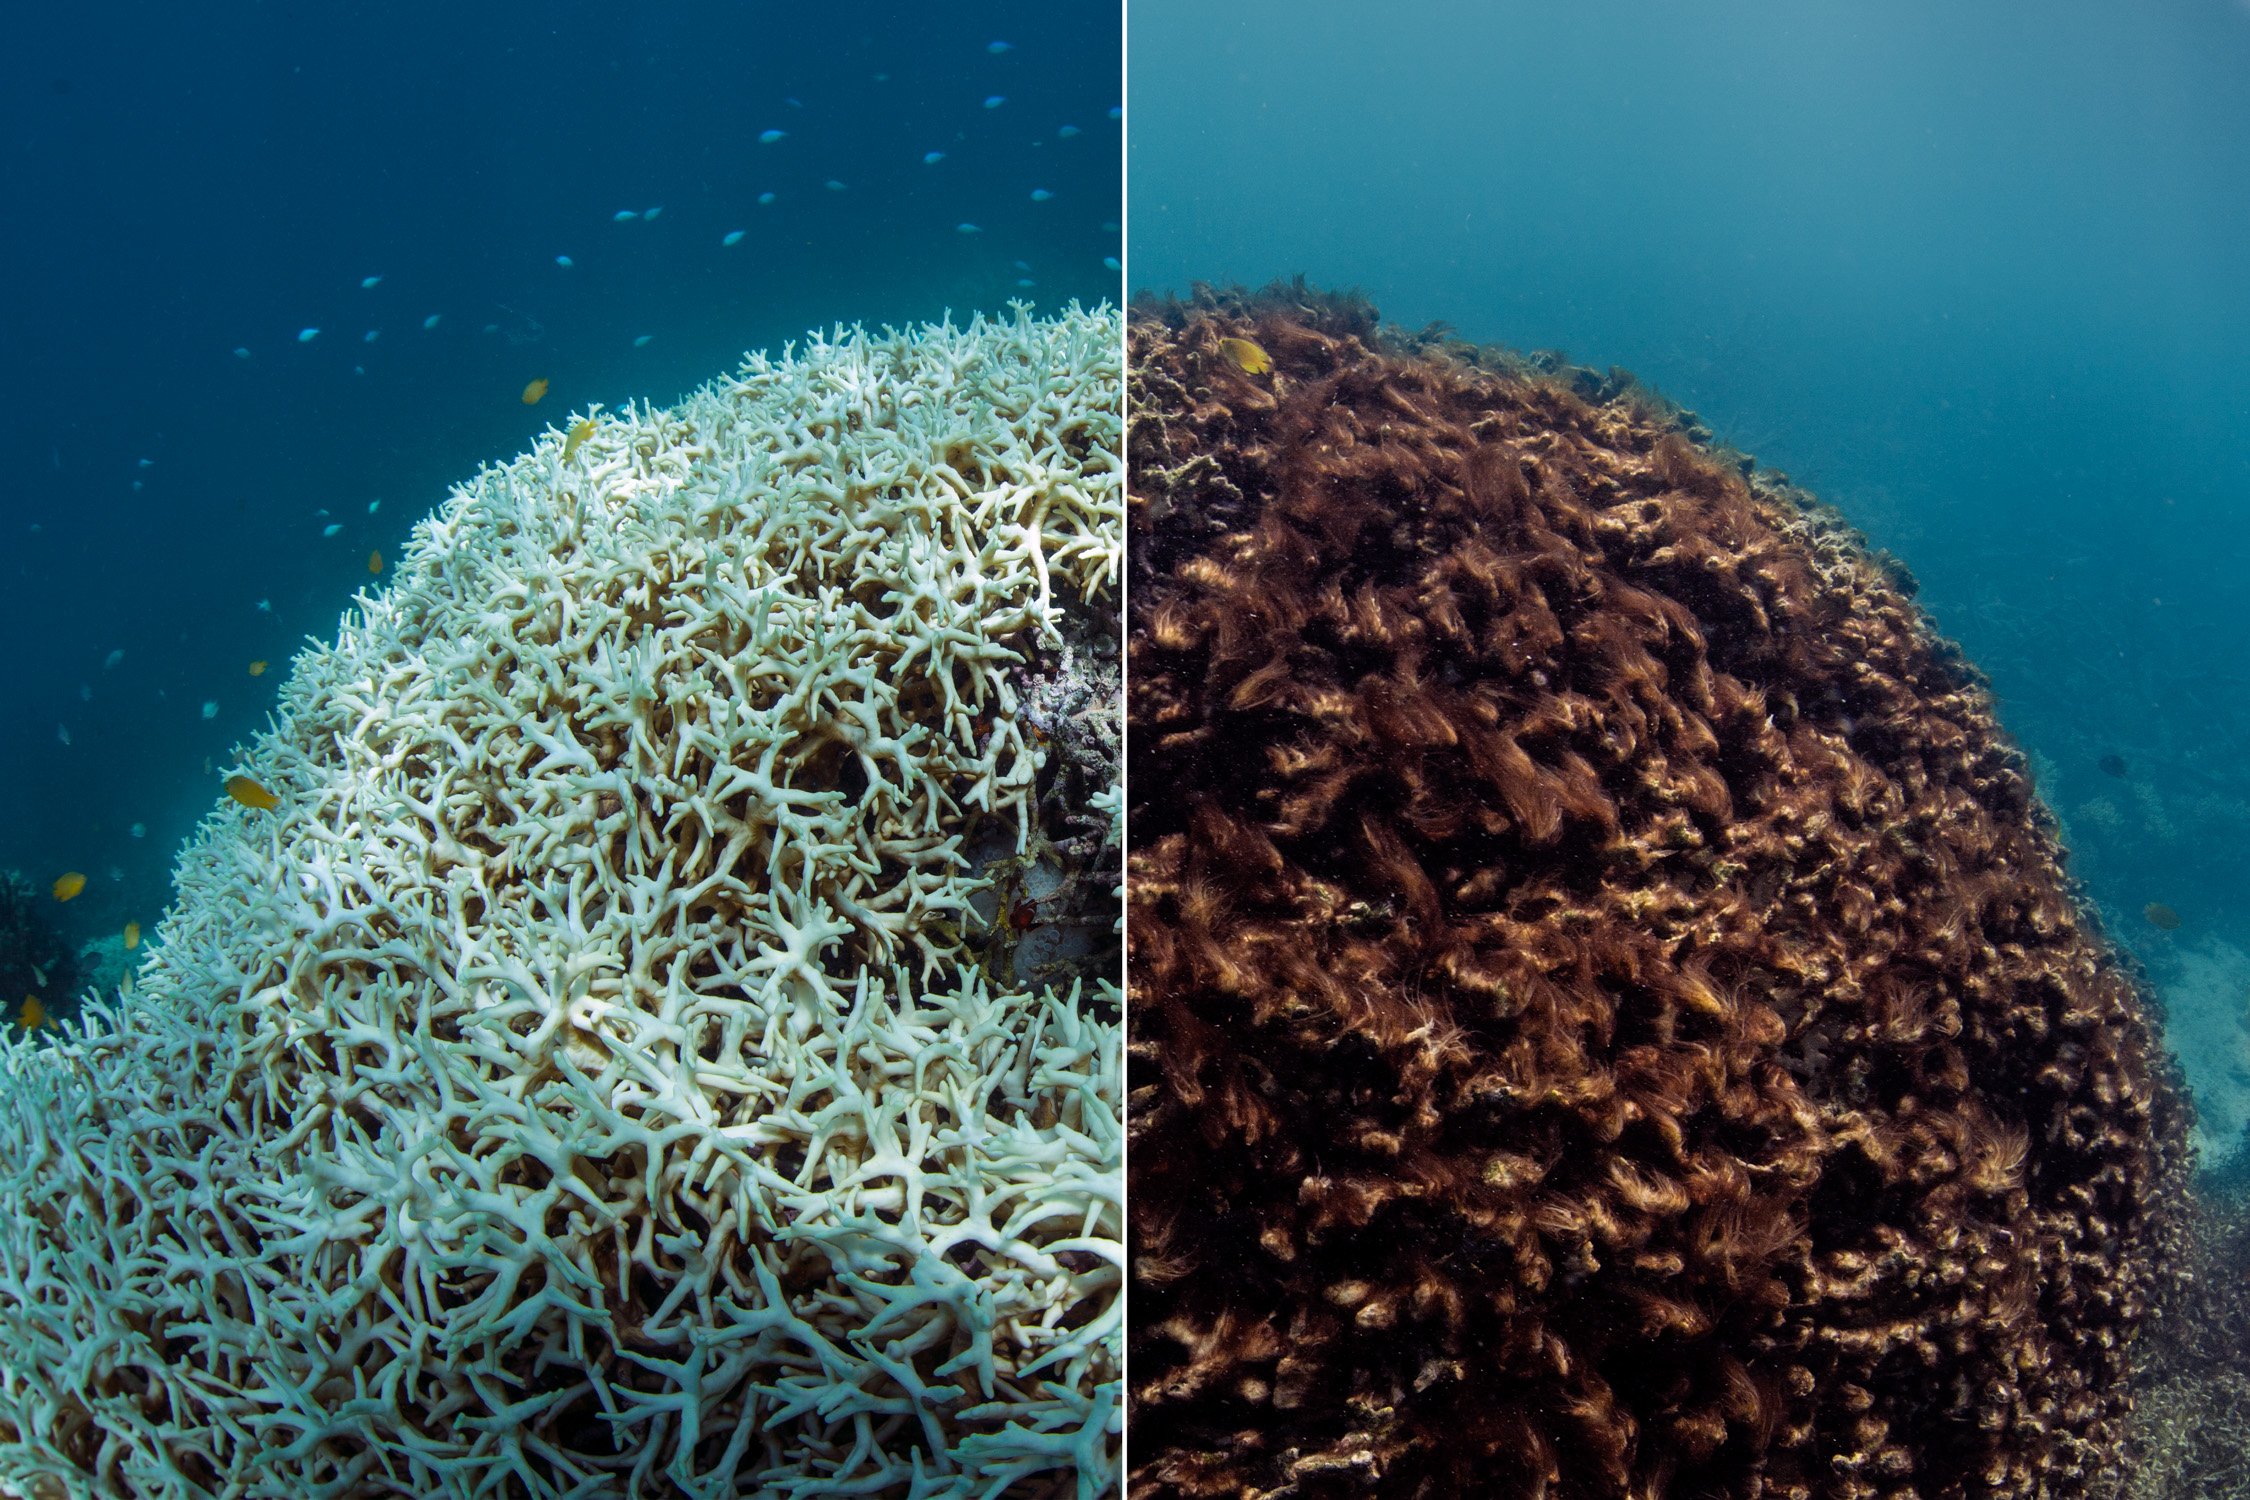 011-BeforeAfter-Coral-Bleaching-©-Underwater-Earth_XL-Catlin-Seaview-Survey_Christophe-Bailhache.jpg